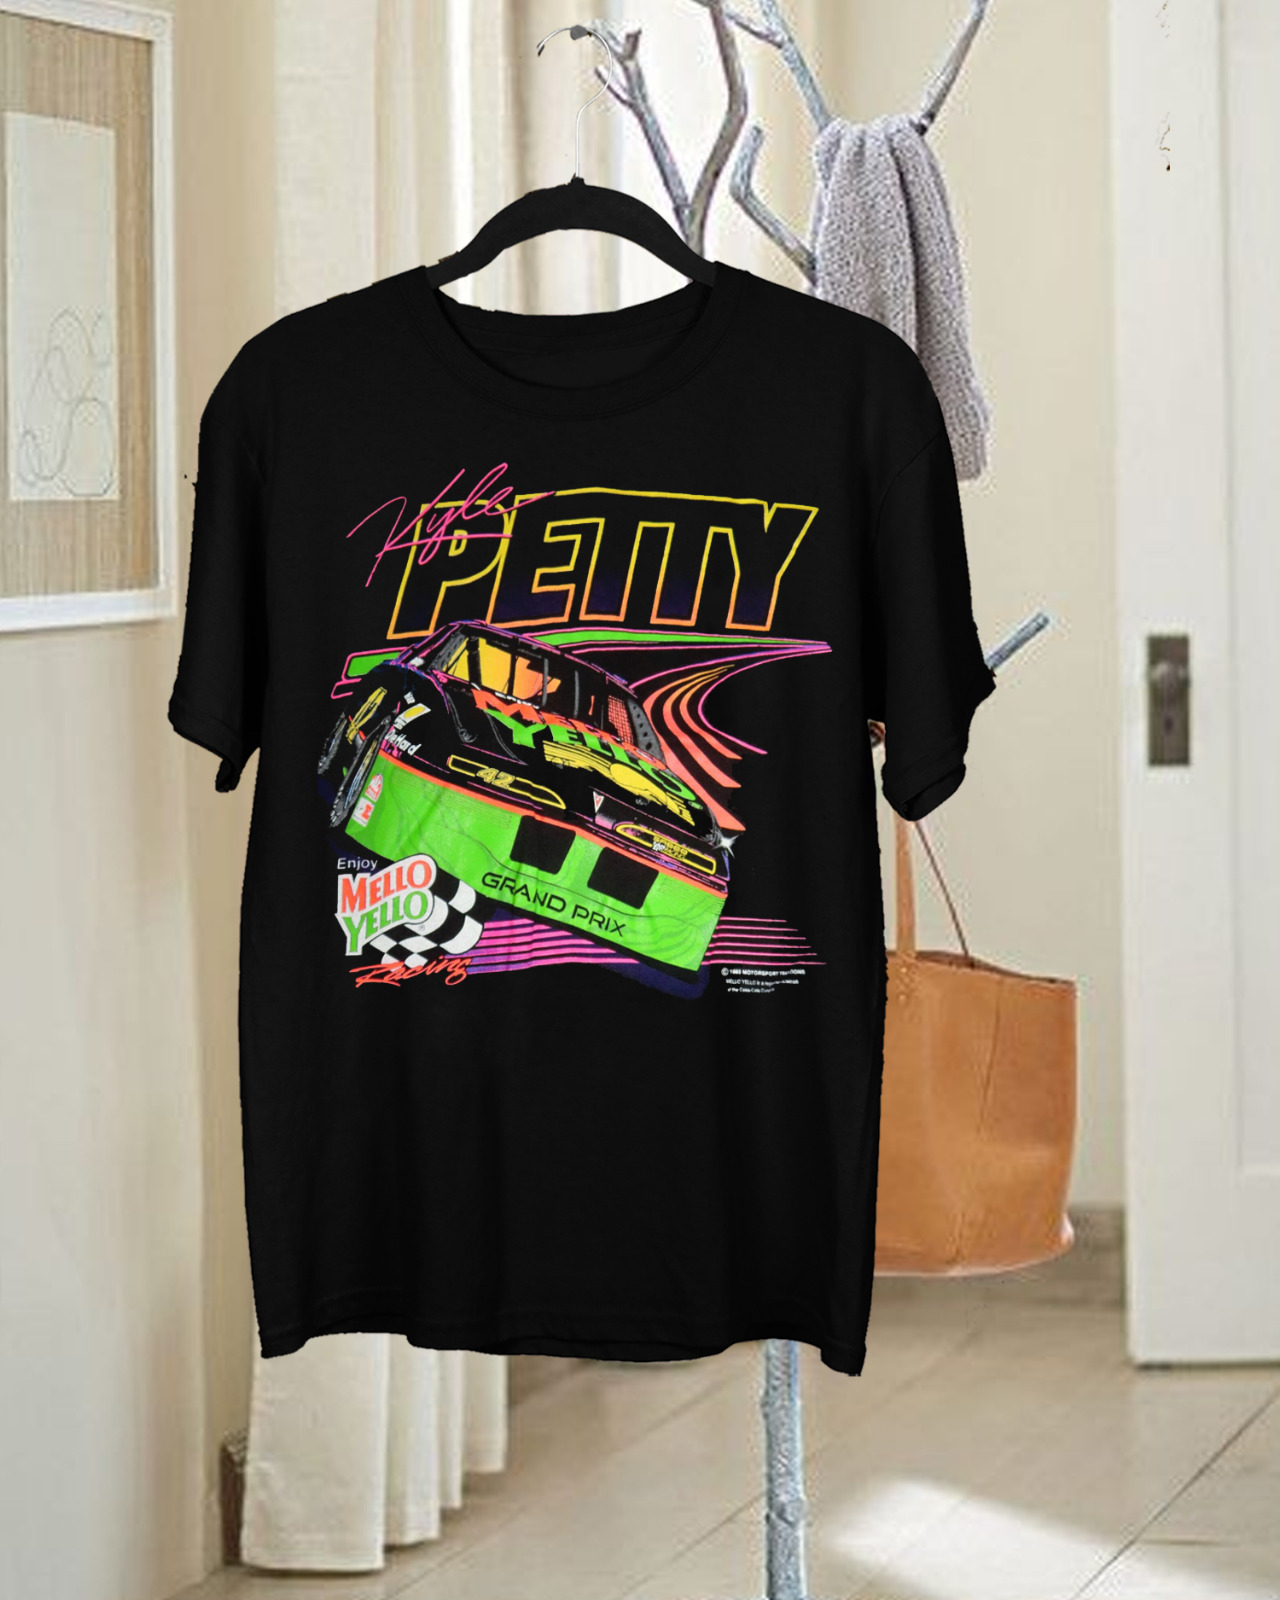 KYLE PETTY Short Sleeve Gift For Fan Black All Size T-Shirt